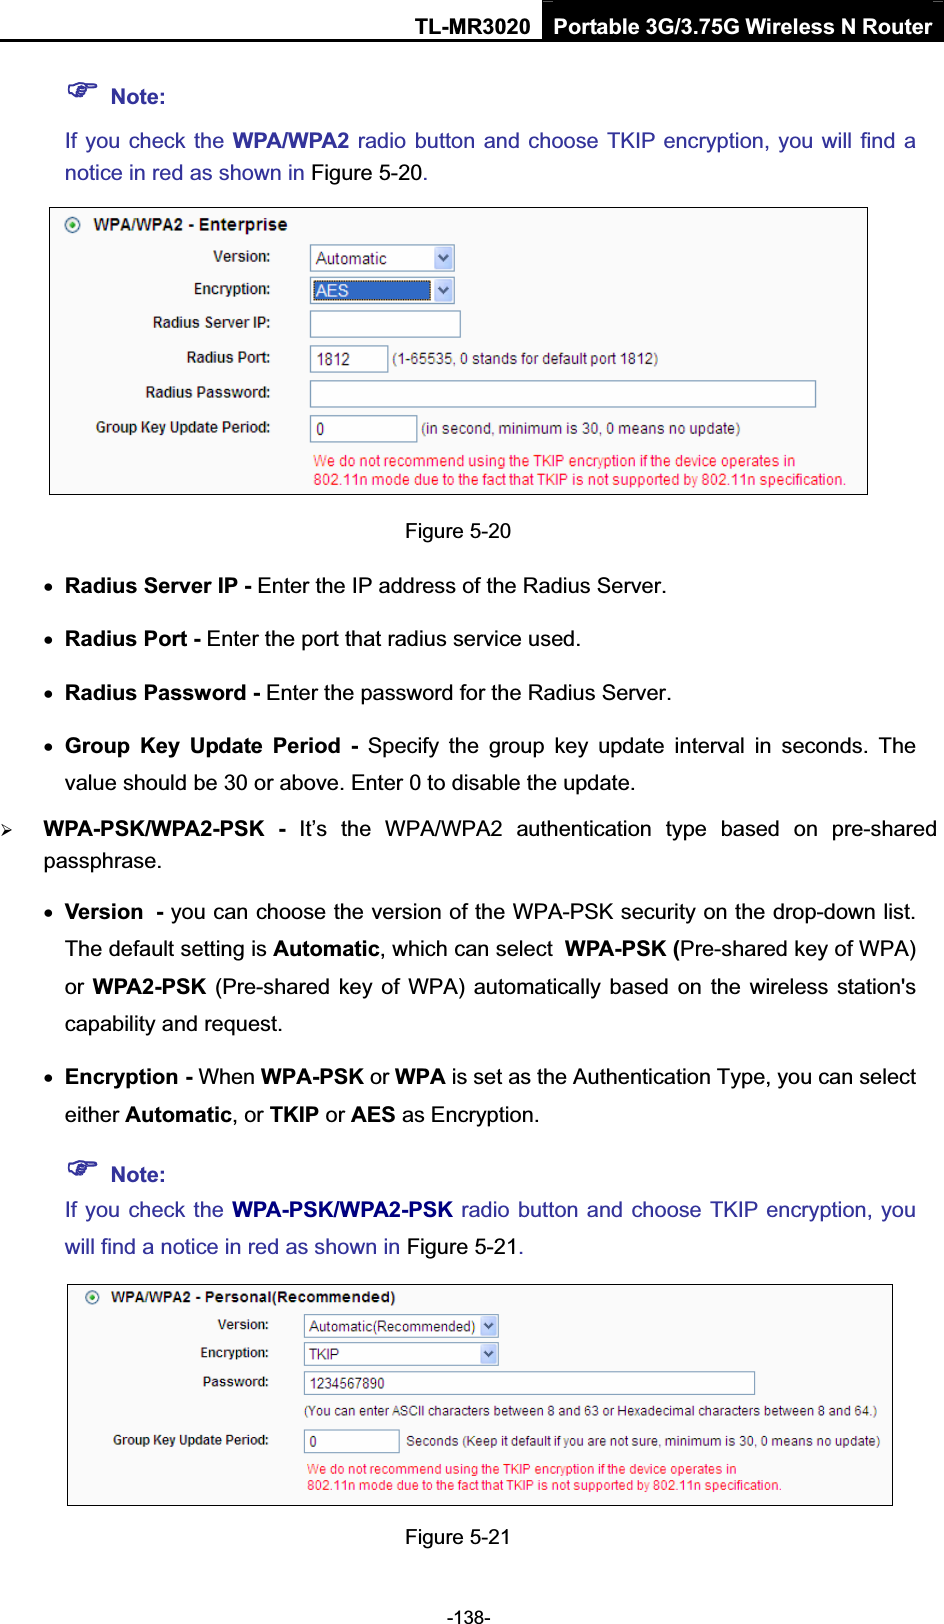 TL-MR3020 Portable 3G/3.75G Wireless N Router-138-)Note:If you check the WPA/WPA2 radio button and choose TKIP encryption, you will find a notice in red as shown in Figure 5-20.Figure 5-20 xRadius Server IP - Enter the IP address of the Radius Server. xRadius Port - Enter the port that radius service used. xRadius Password - Enter the password for the Radius Server. xGroup  Key  Update  Period  -  Specify  the  group  key  update  interval  in  seconds.  The value should be 30 or above. Enter 0 to disable the update. ¾WPA-PSK/WPA2-PSK  -  It’s  the  WPA/WPA2  authentication  type  based  on  pre-shared passphrase.xVersion- you can choose the version of the WPA-PSK security on the drop-down list. The default setting is Automatic, which can selectWPA-PSK (Pre-shared key of WPA) or WPA2-PSK (Pre-shared key  of  WPA) automatically based on the wireless station&apos;s capability and request. xEncryption-When WPA-PSK or WPA is set as the Authentication Type, you can select either Automatic, or TKIP or AES as Encryption. )Note:If you check the WPA-PSK/WPA2-PSK radio button and choose TKIP encryption, you will find a notice in red as shown in Figure 5-21.Figure 5-21 